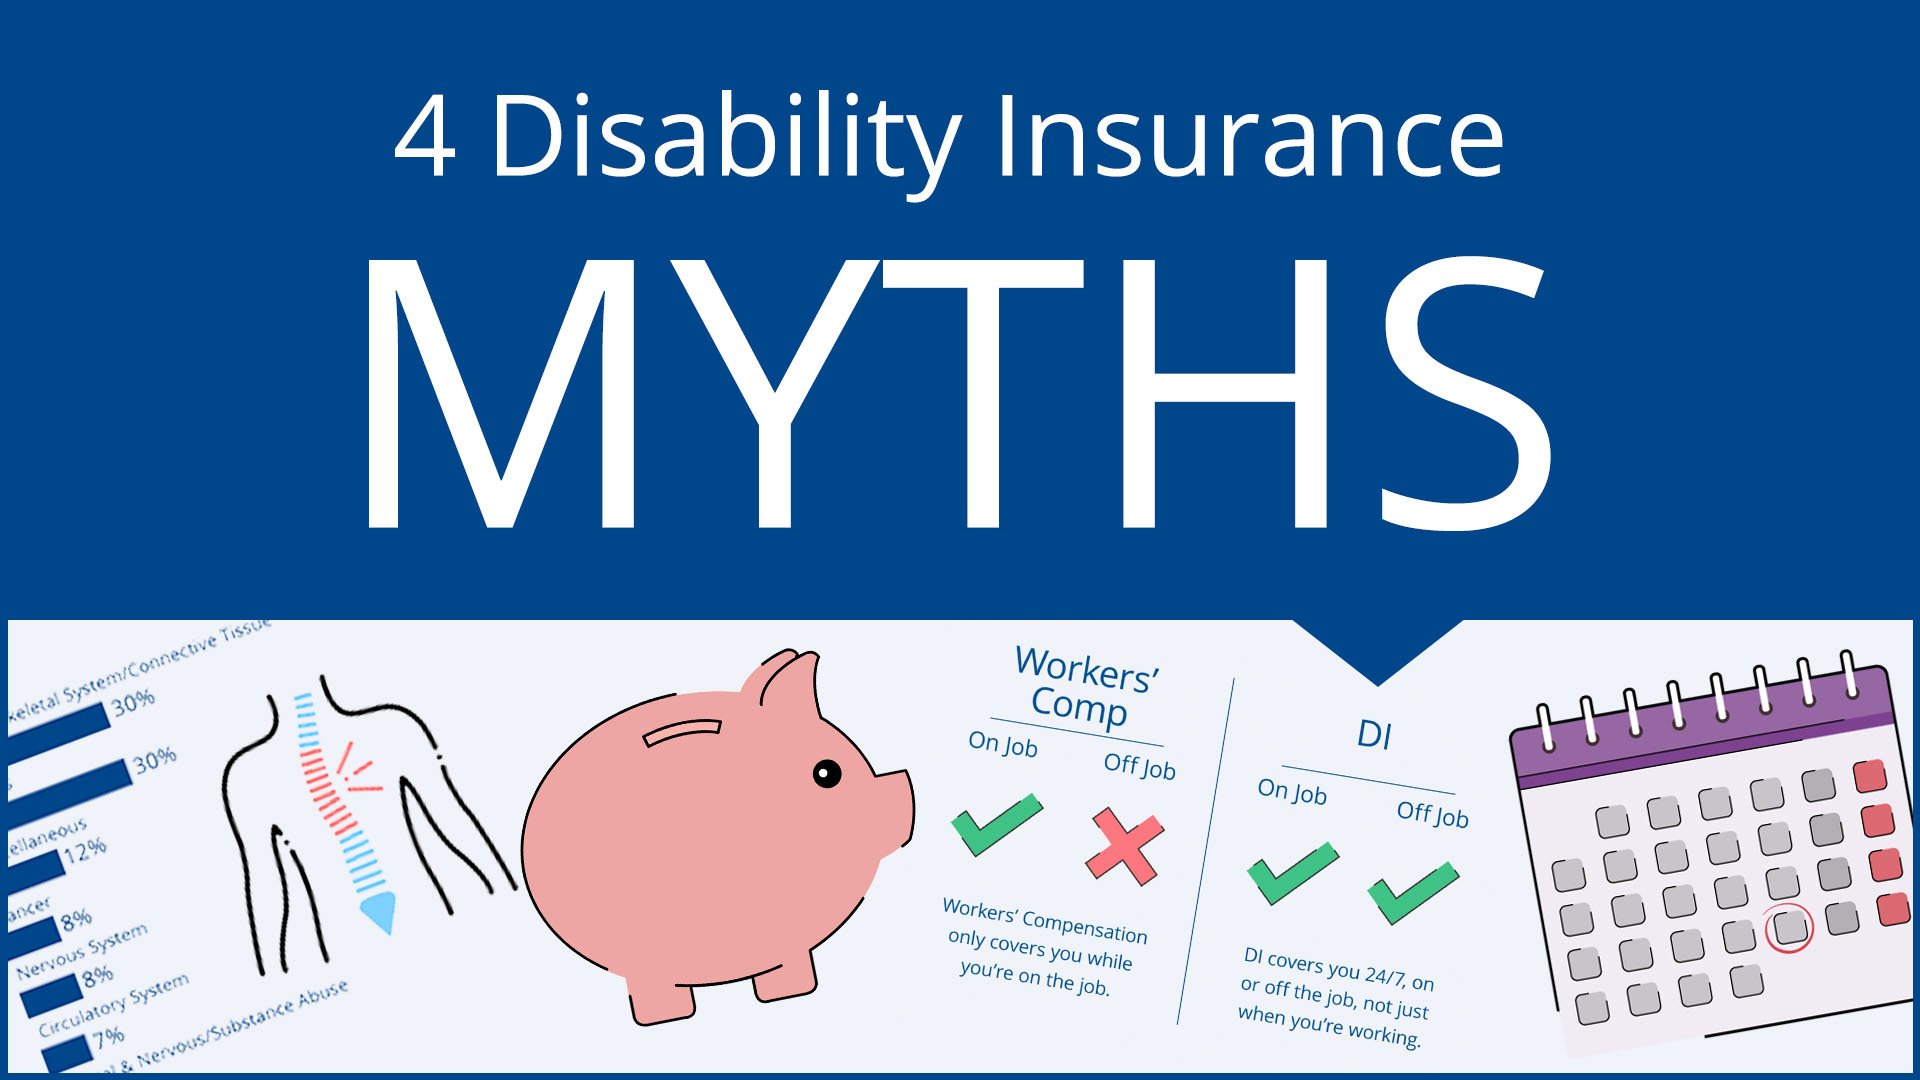 animation thumbnail of icons from the video and the video title 4 disability insurance myths